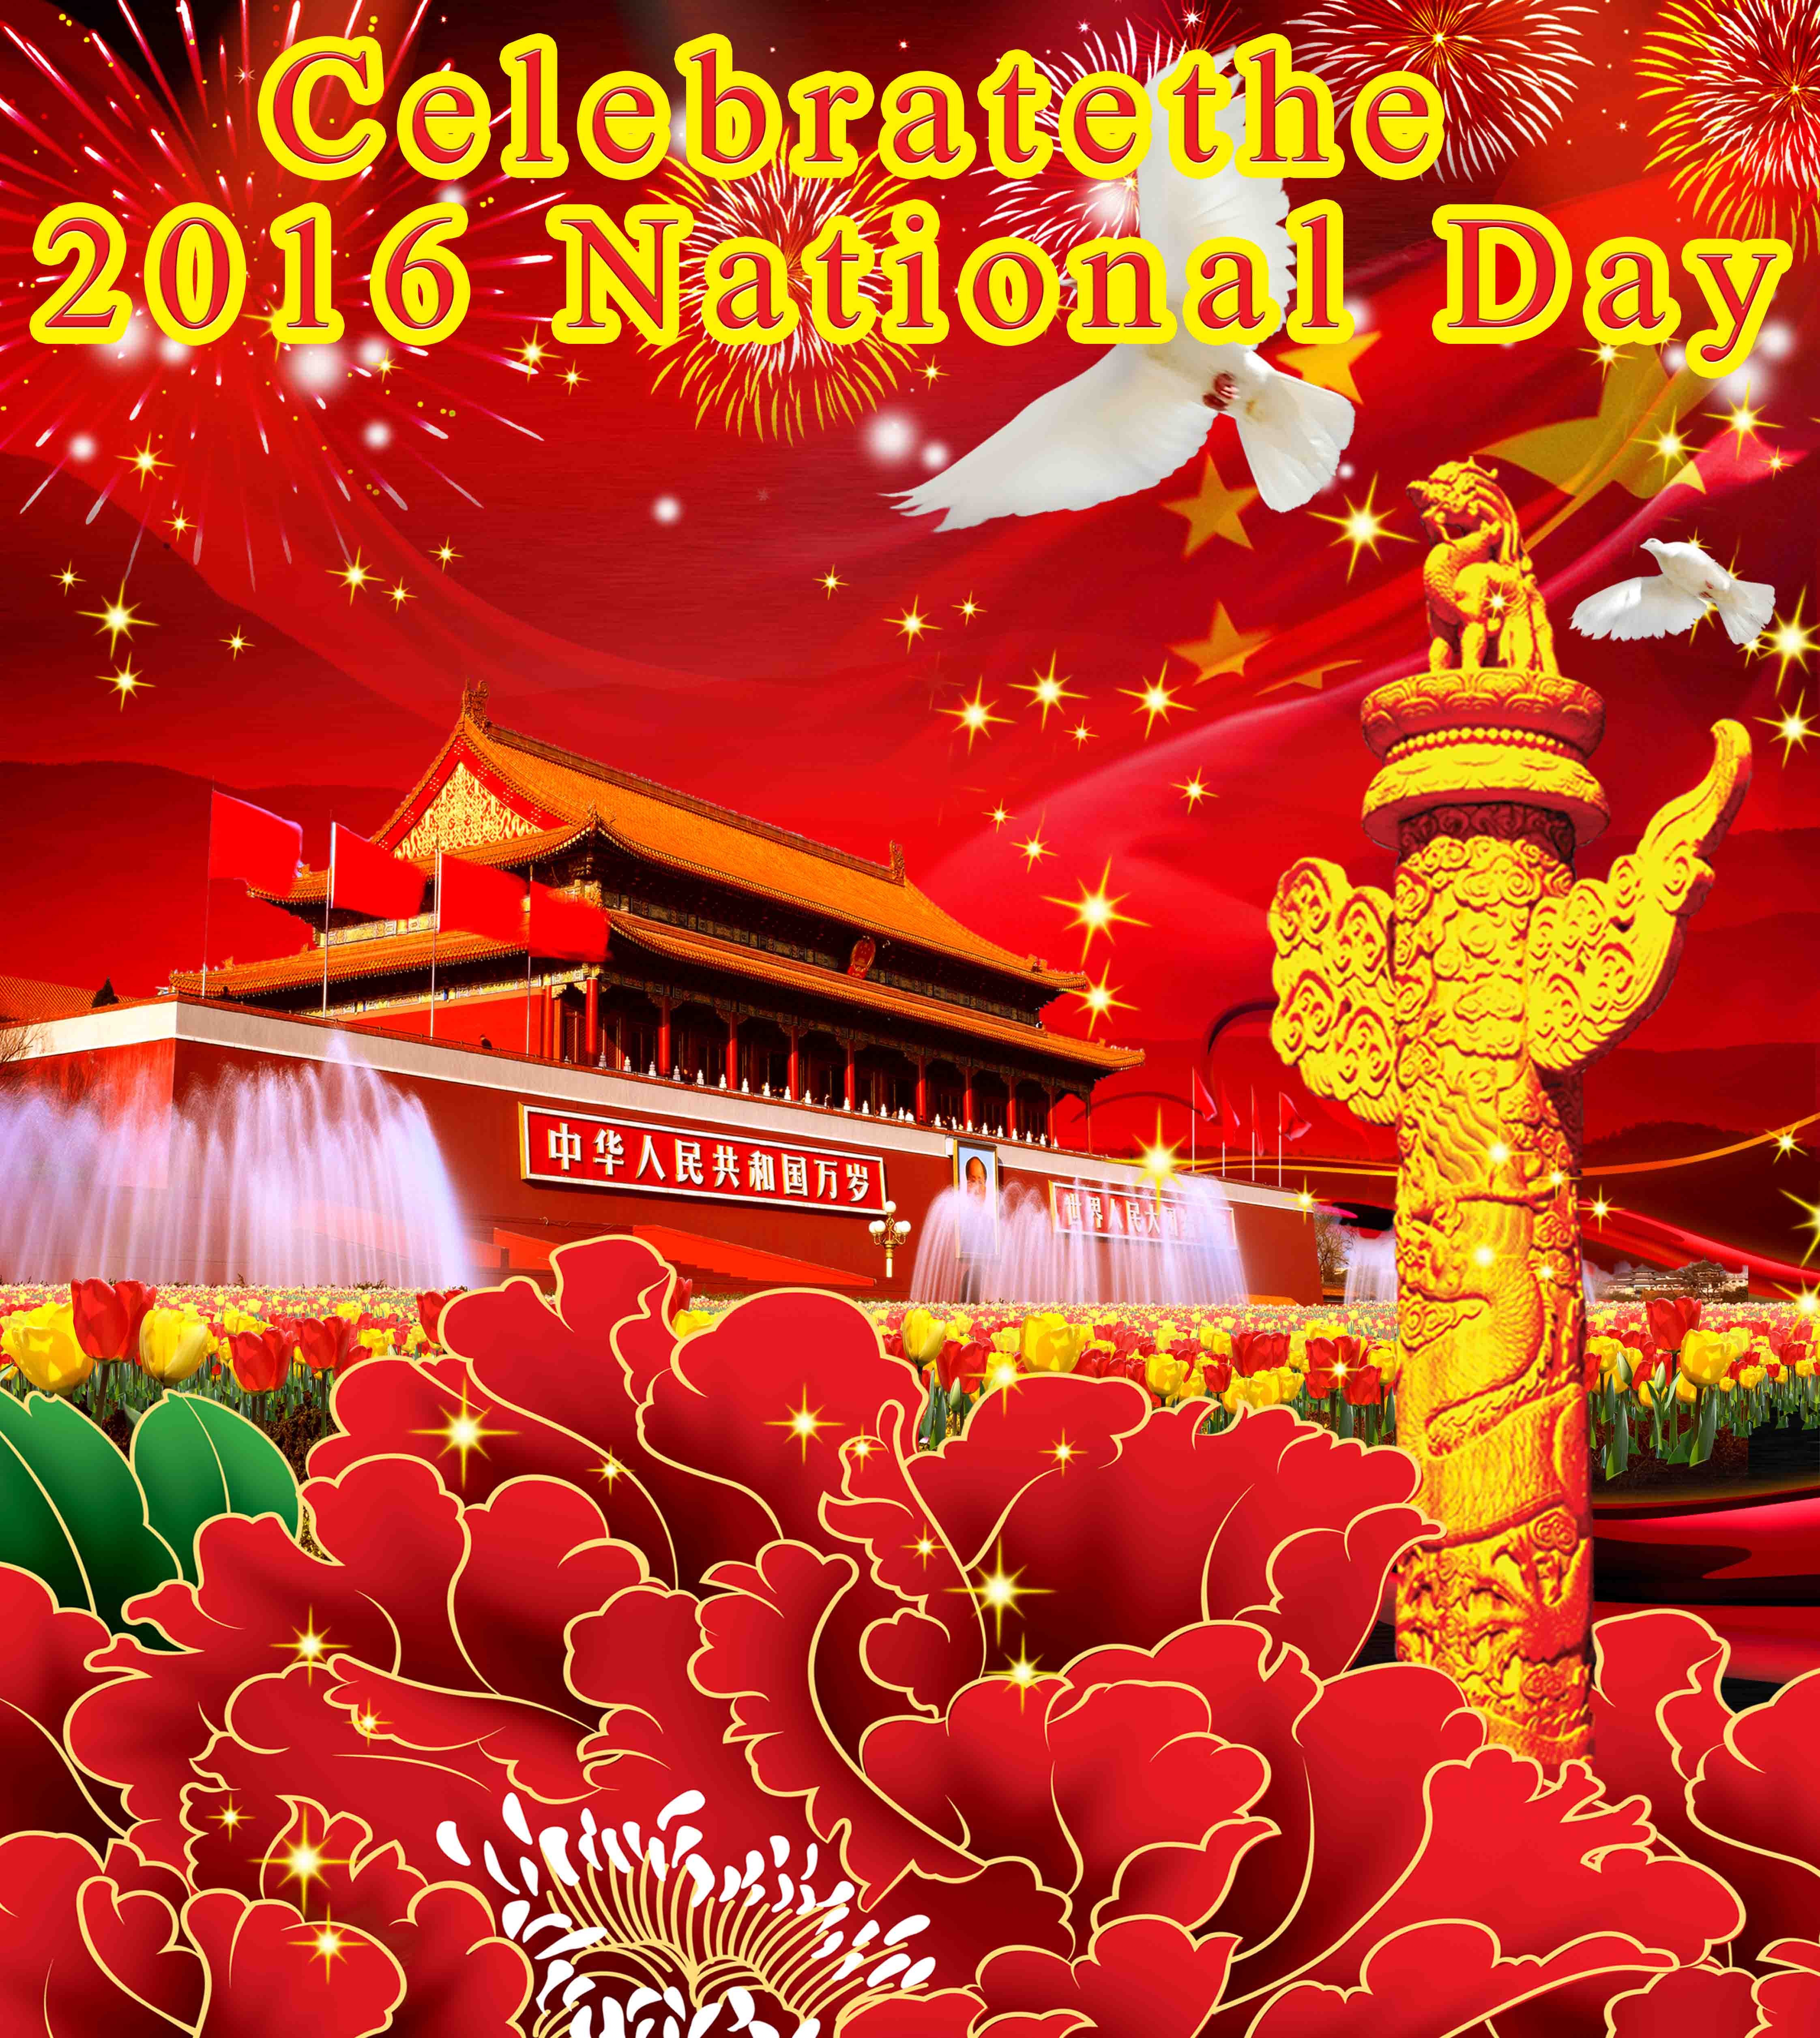 Celebrate the 2016 National Day